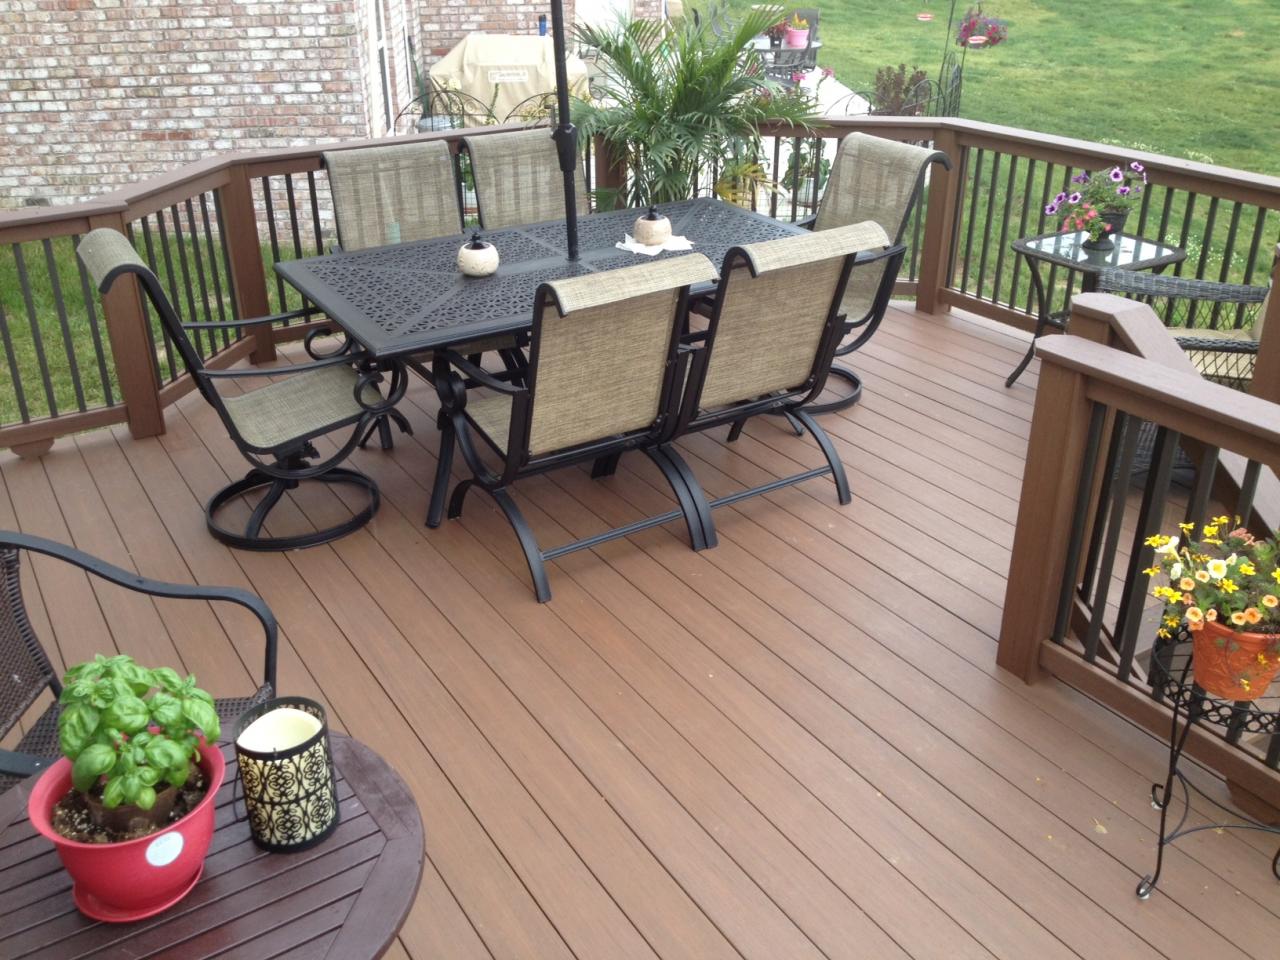 AZEK Building Products offers high quality decking and rail.